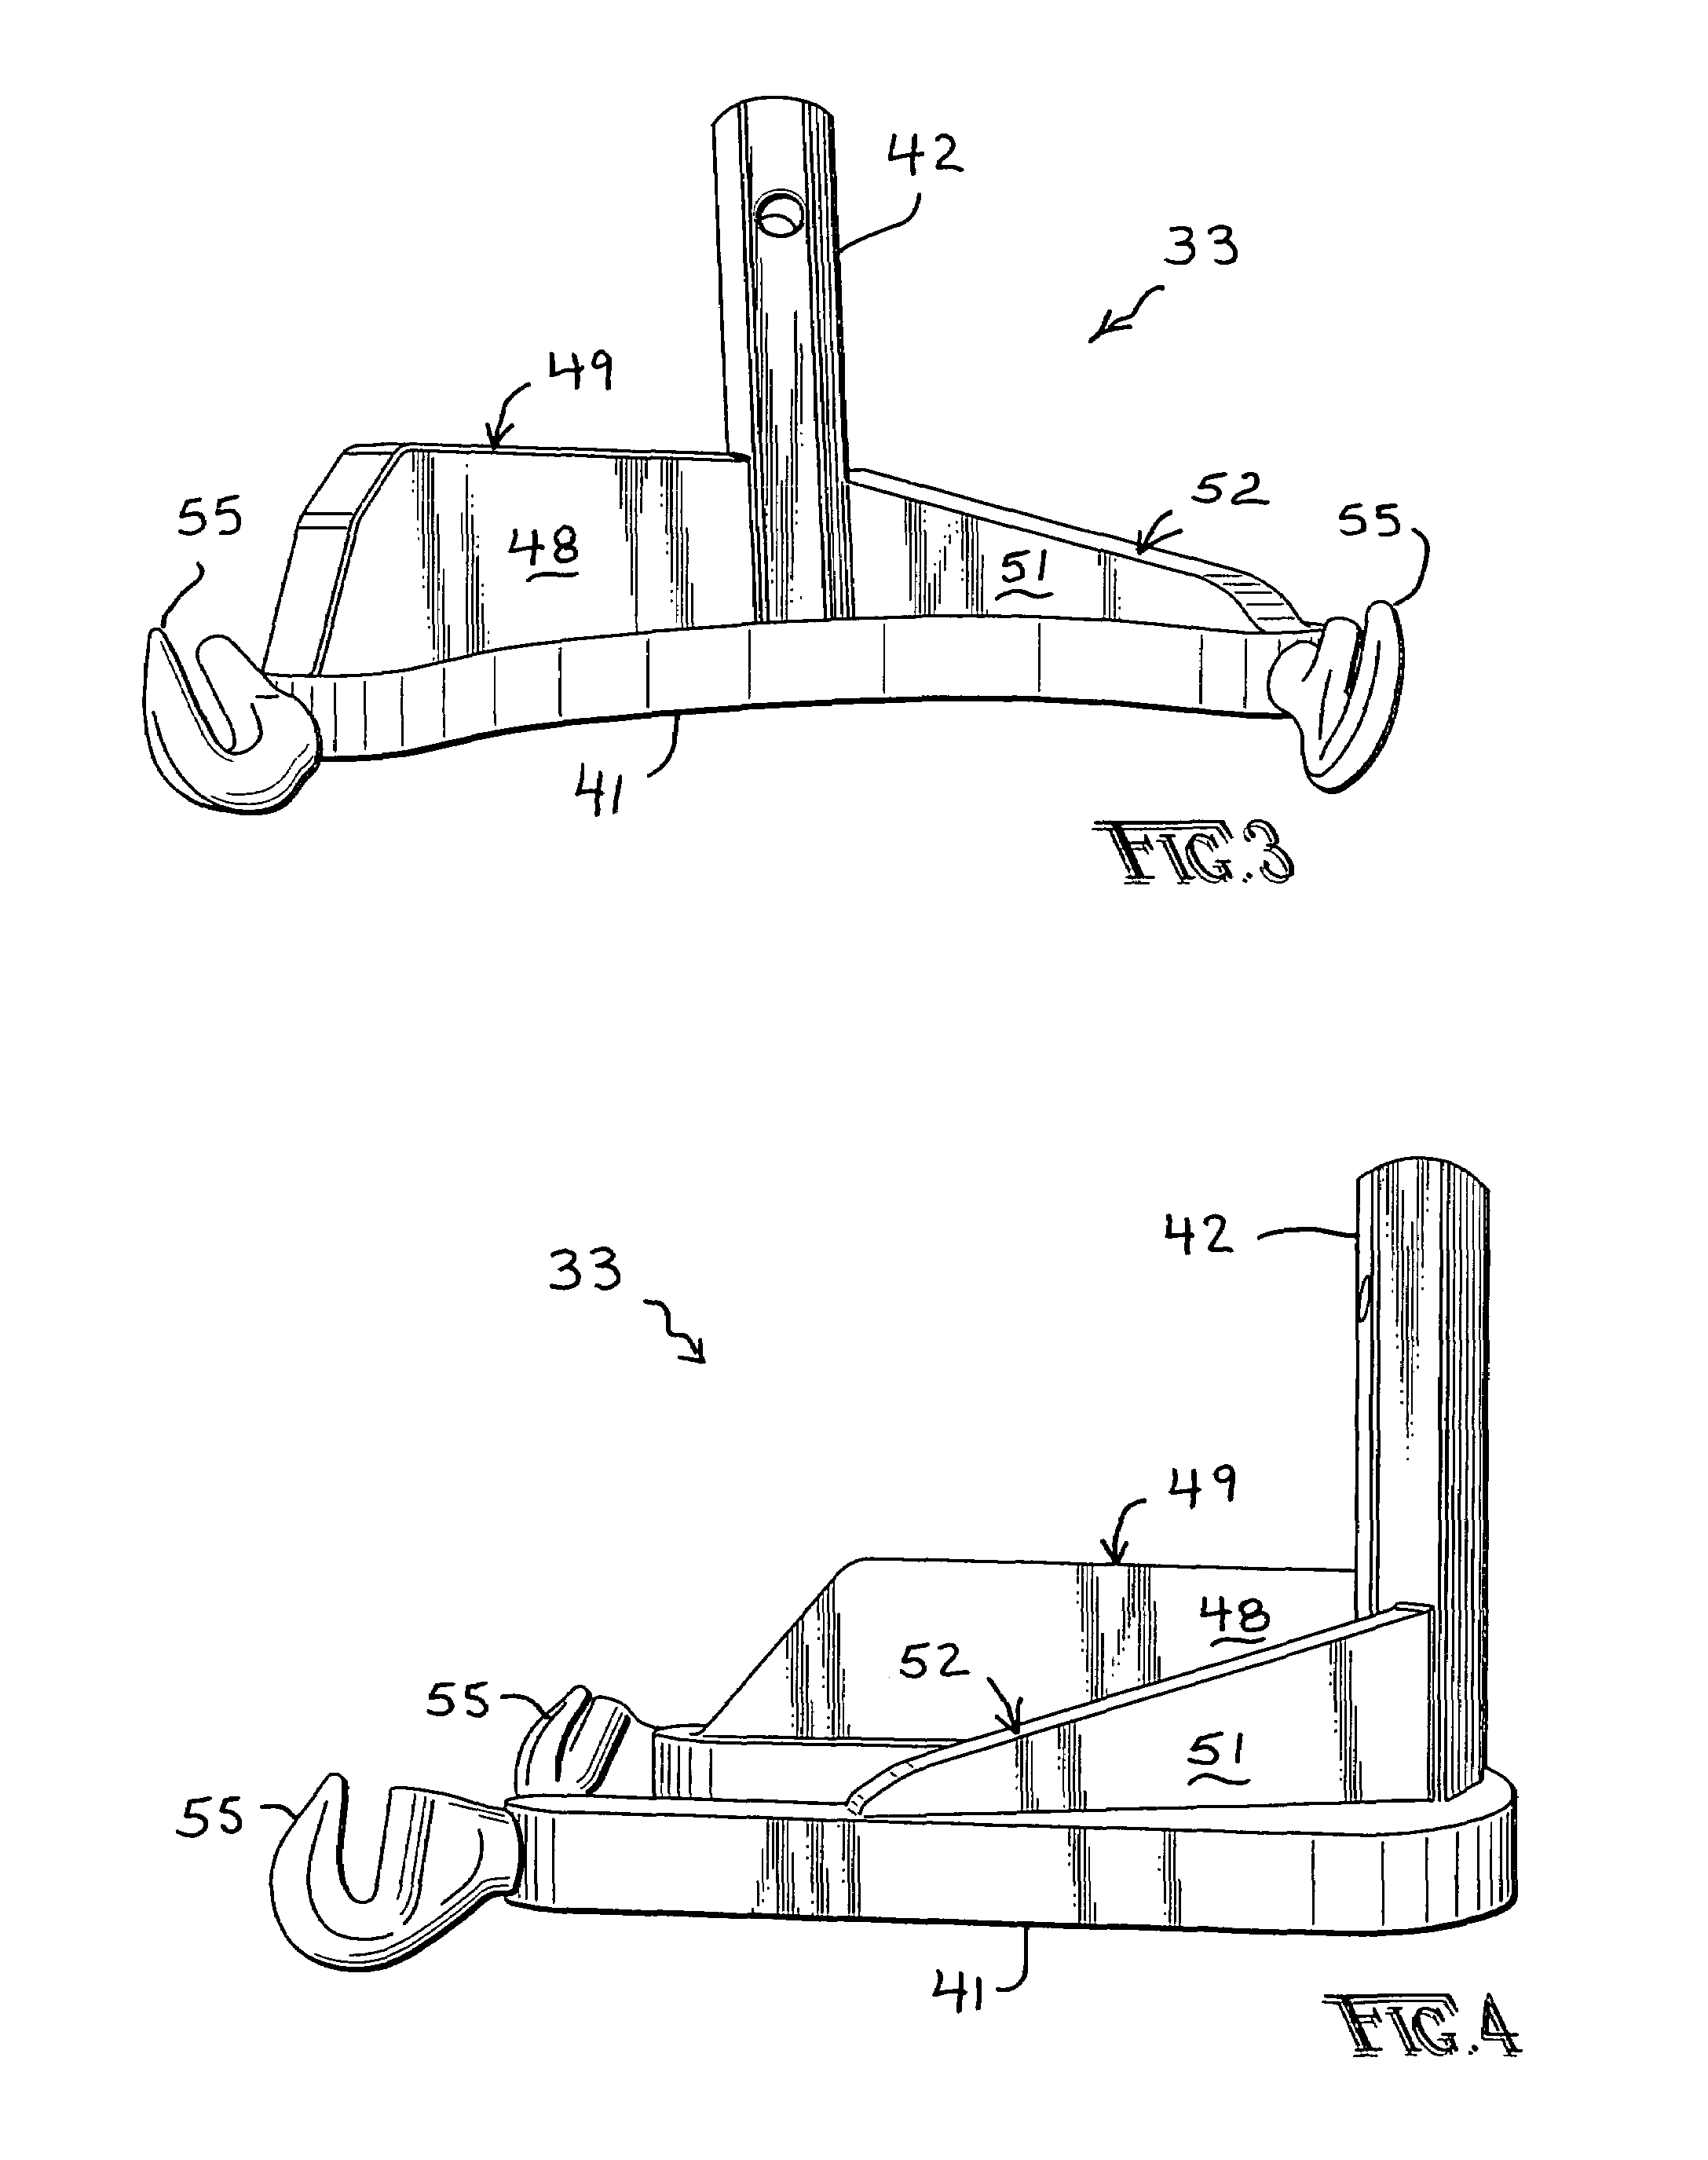 Accessories and method for hollow stem auger retraction